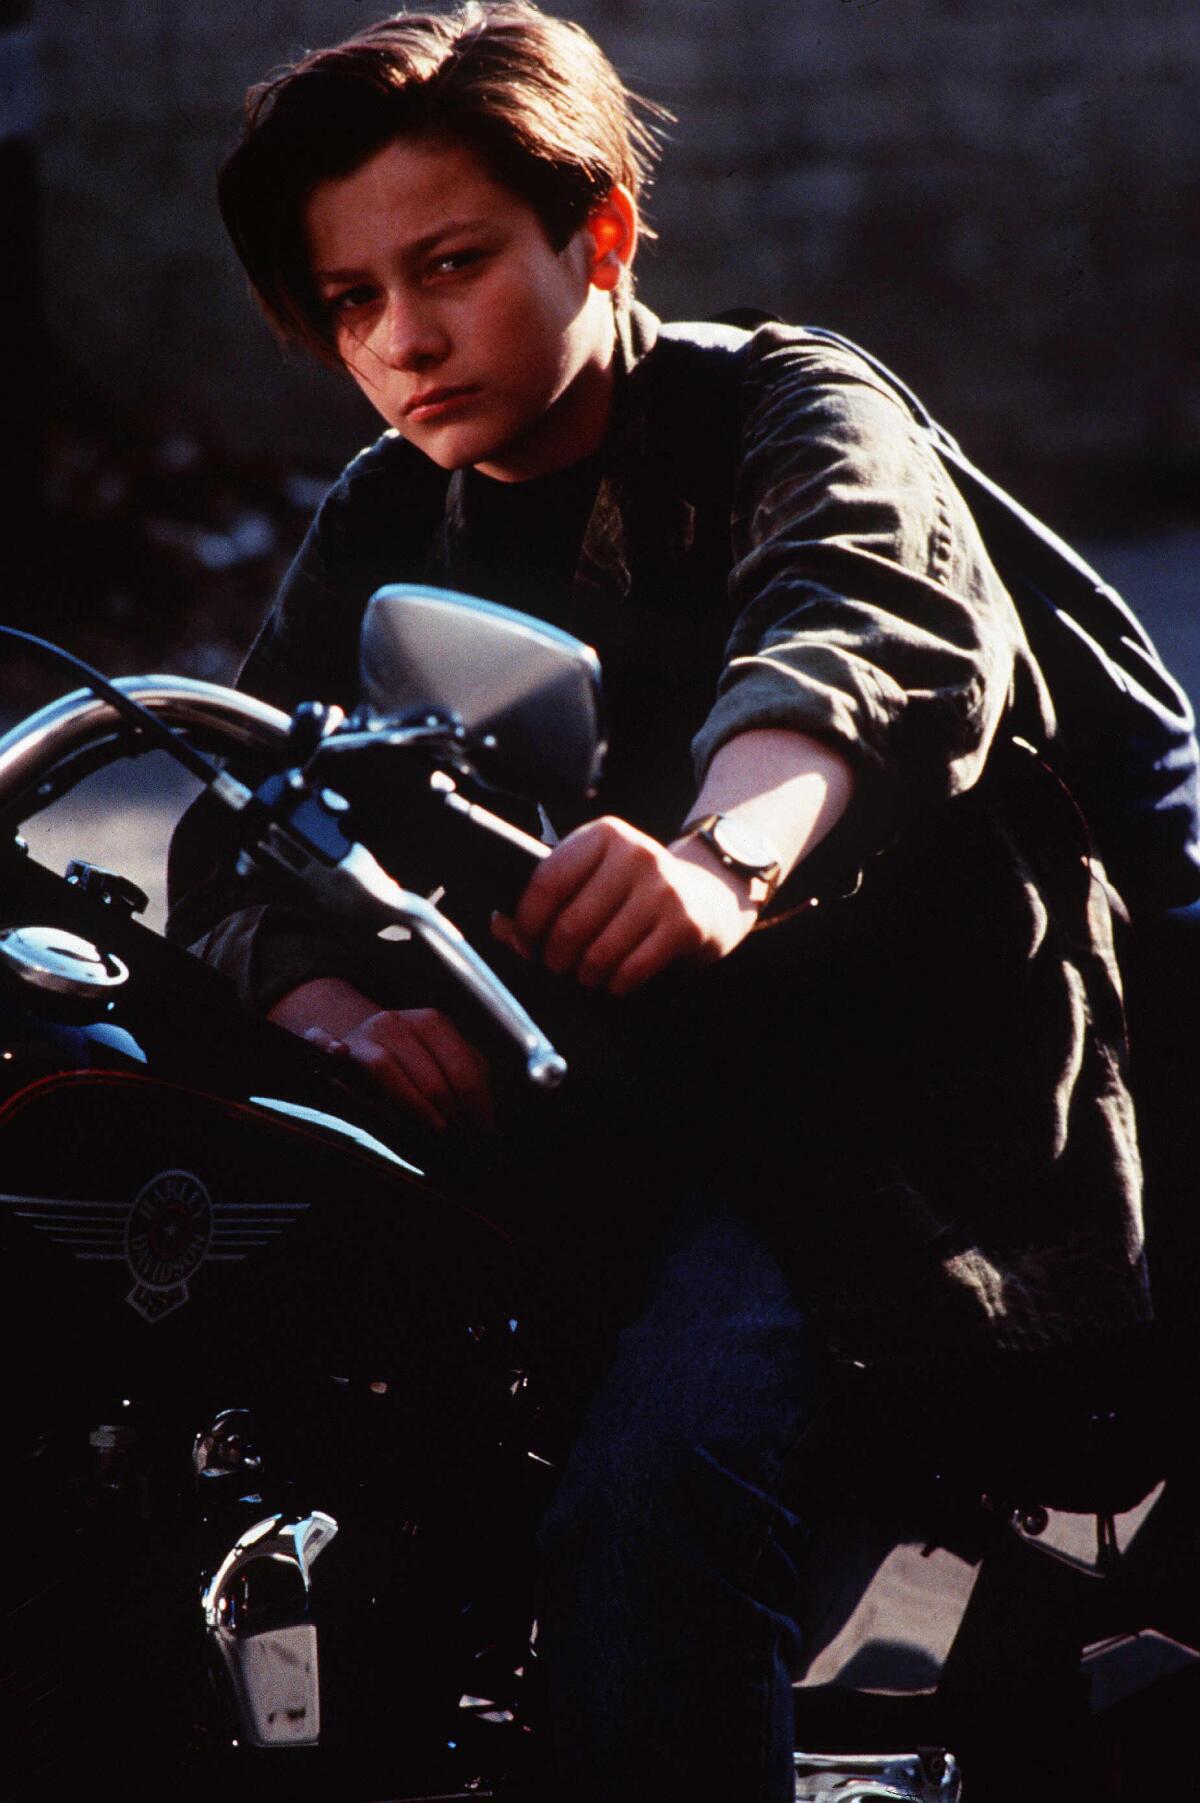 Edward Furlong as John Connor in "Terminator 2: Judgment Day" from 1991.